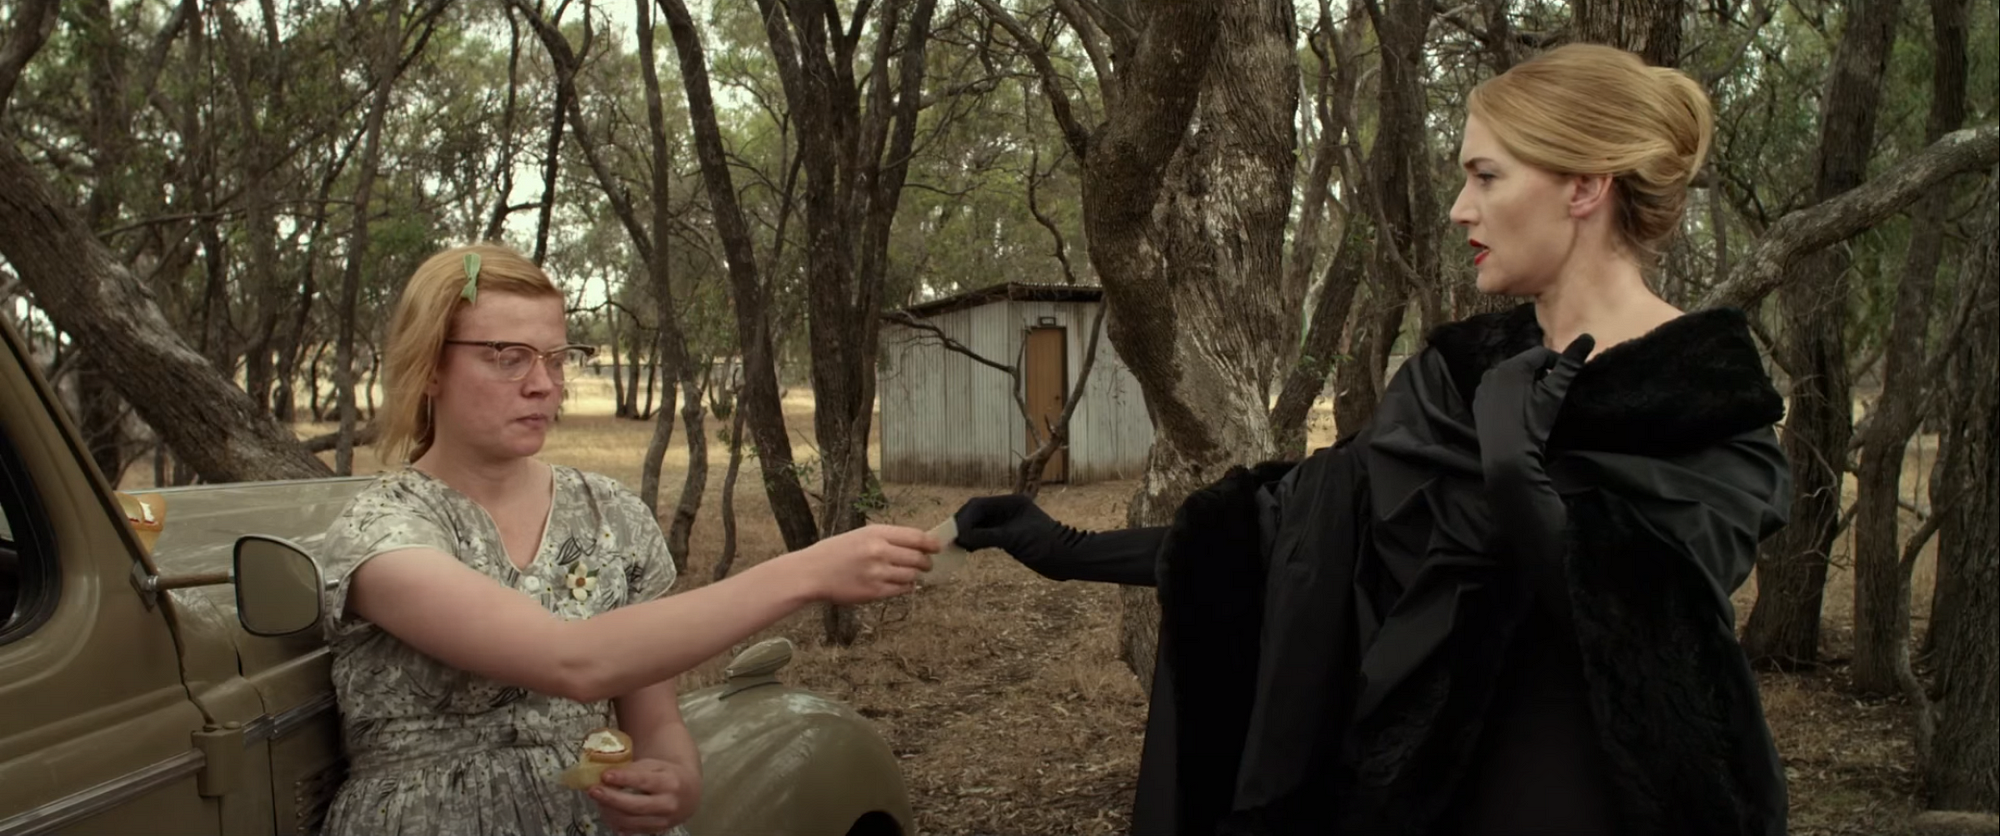 The Dressmaker' is a nonsensical but entertaining mess